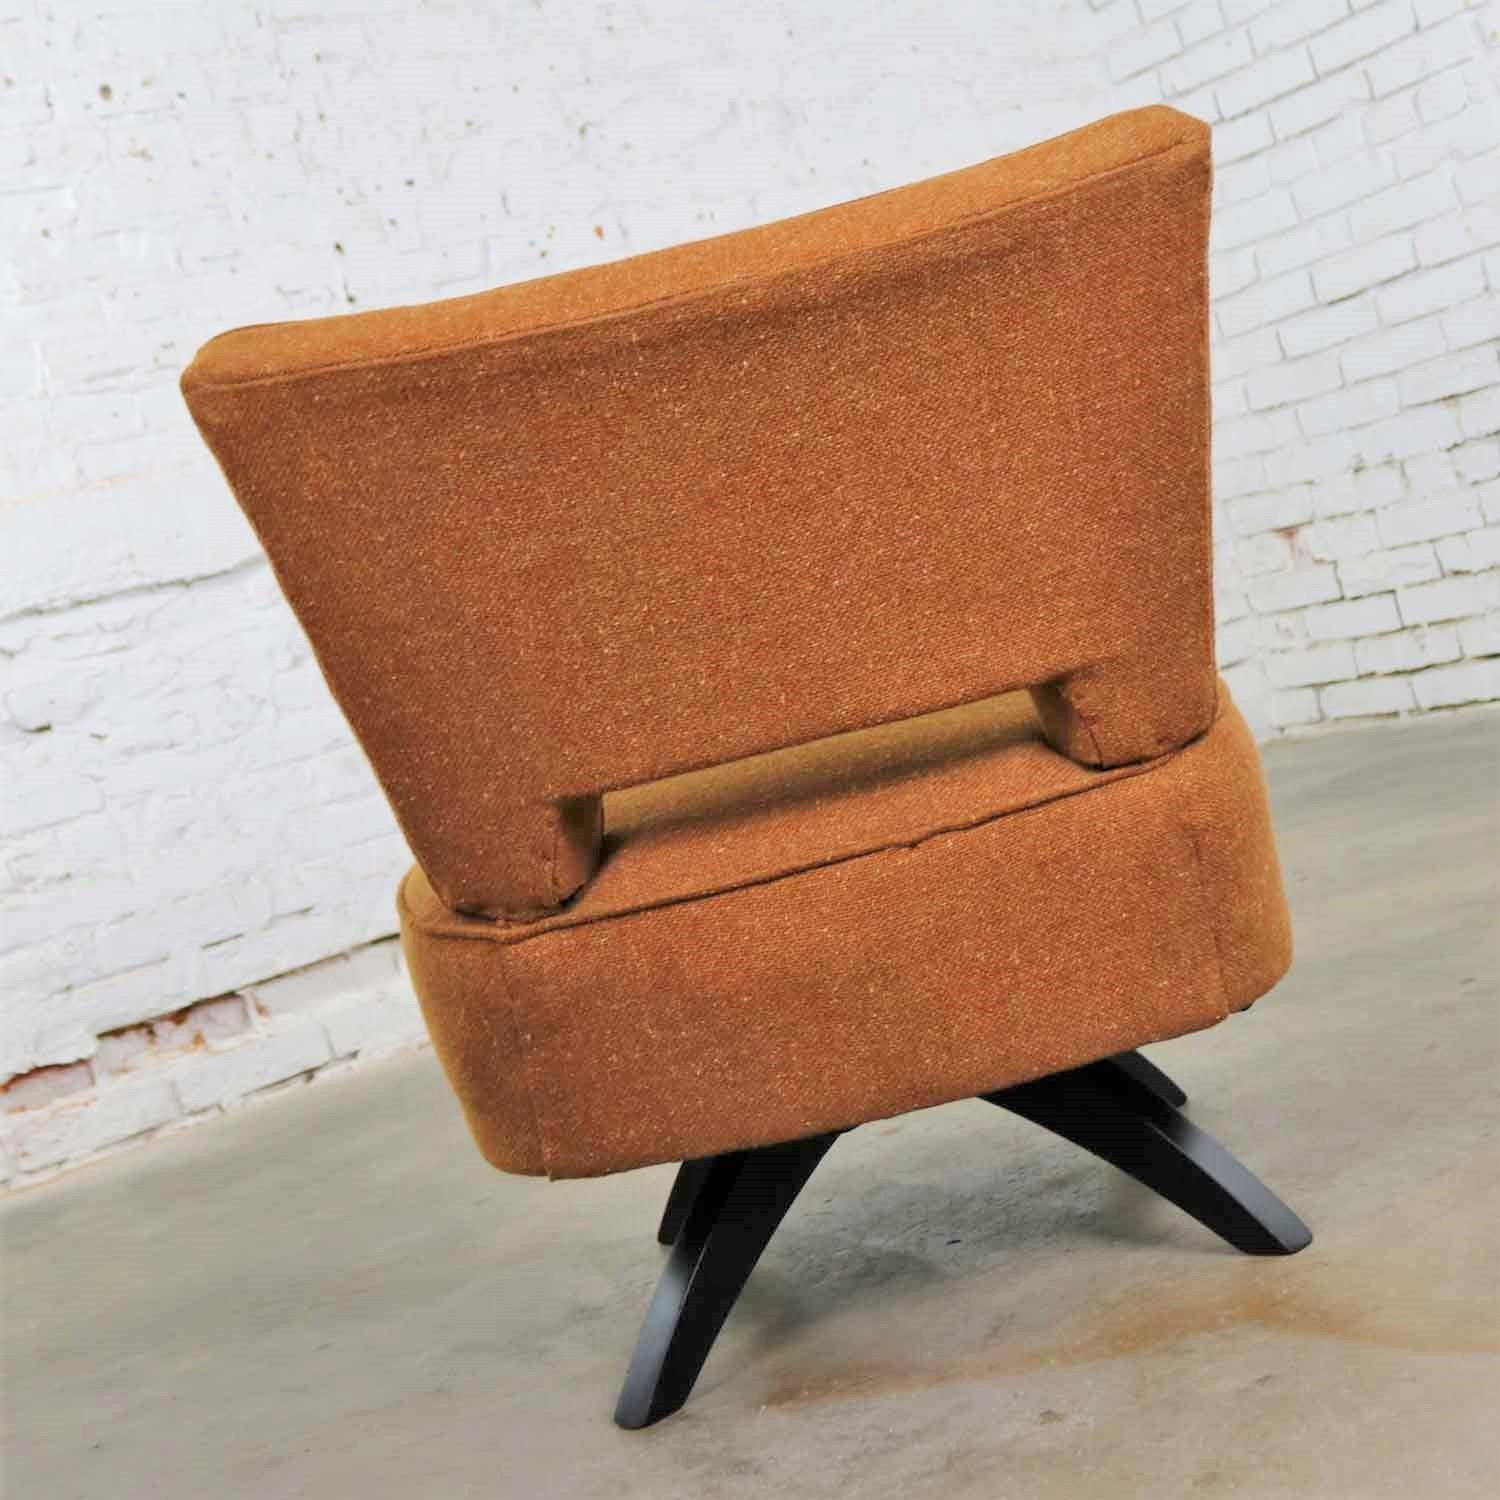 20th Century Mid-Century Modern Swivel Slipper Chair Attributed to Kroehler Manufacturing